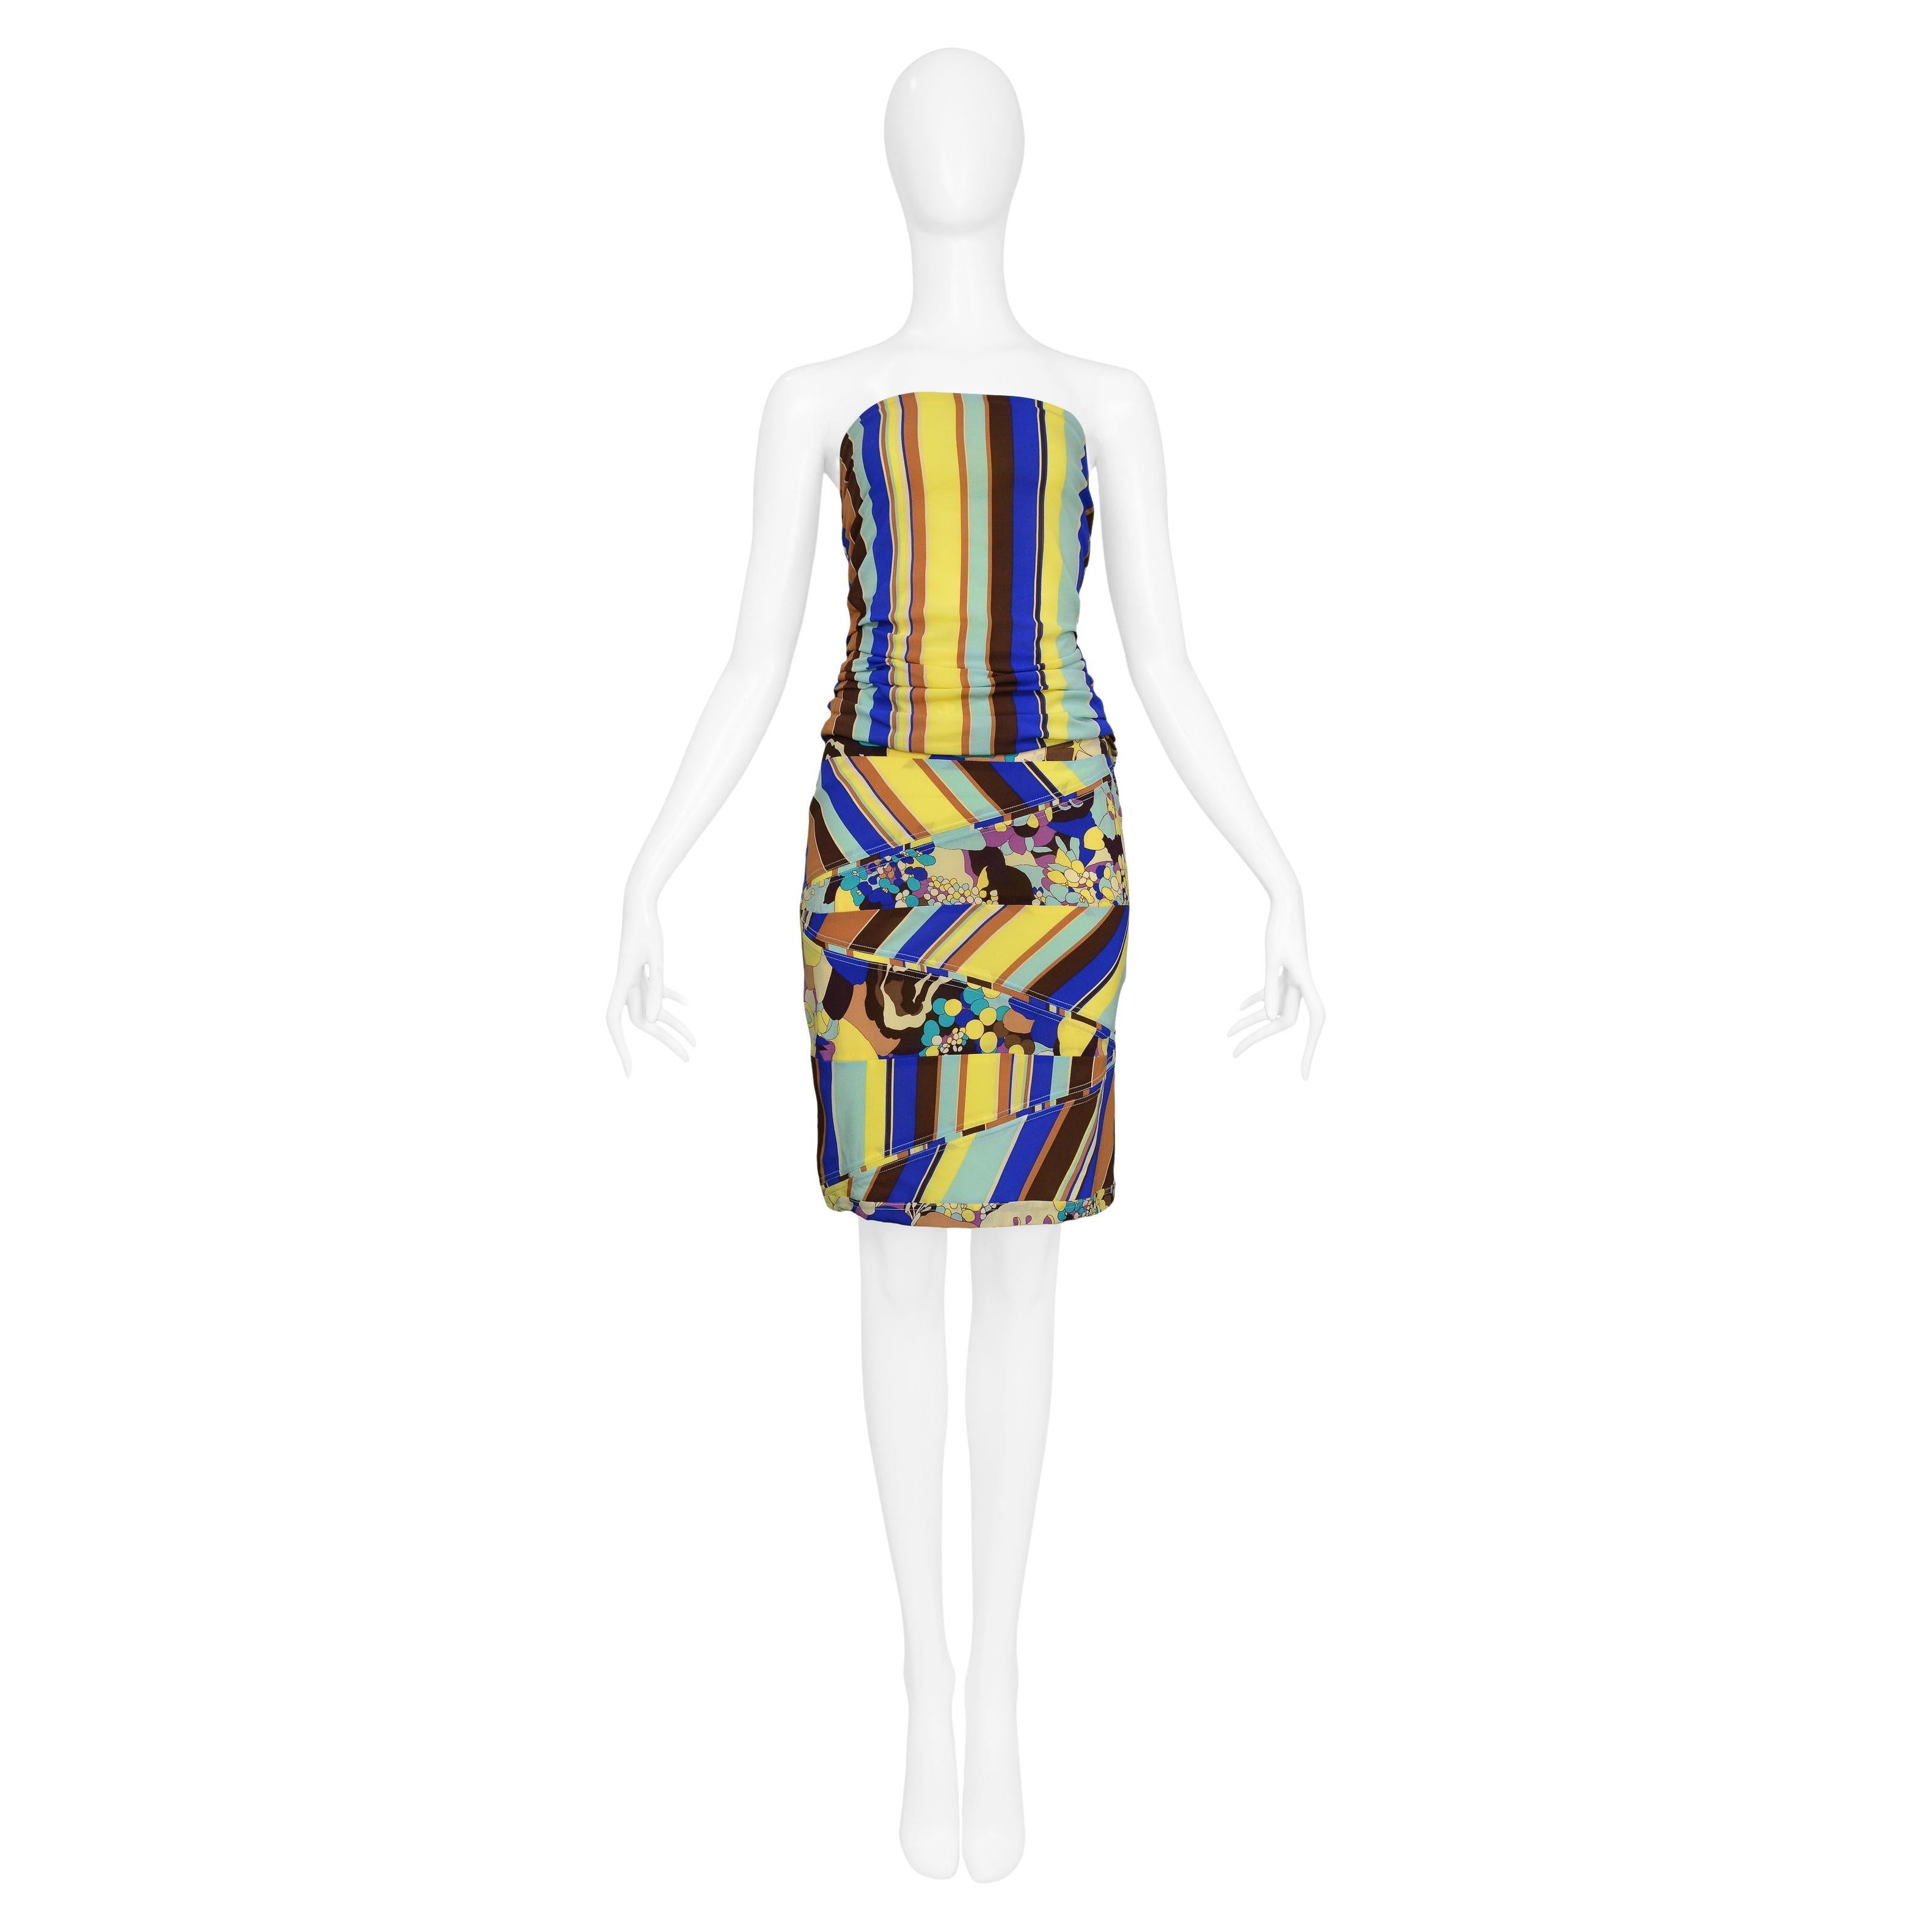 Resurrection Vintage is pleased to offer a vintage Versace yellow, blue, and brown striped top and skirt ensemble featuring floral insets, strapless top with side zipper, and a fitted pencil style skirt with zipper. Circa 2000s. 

Versace 
Size